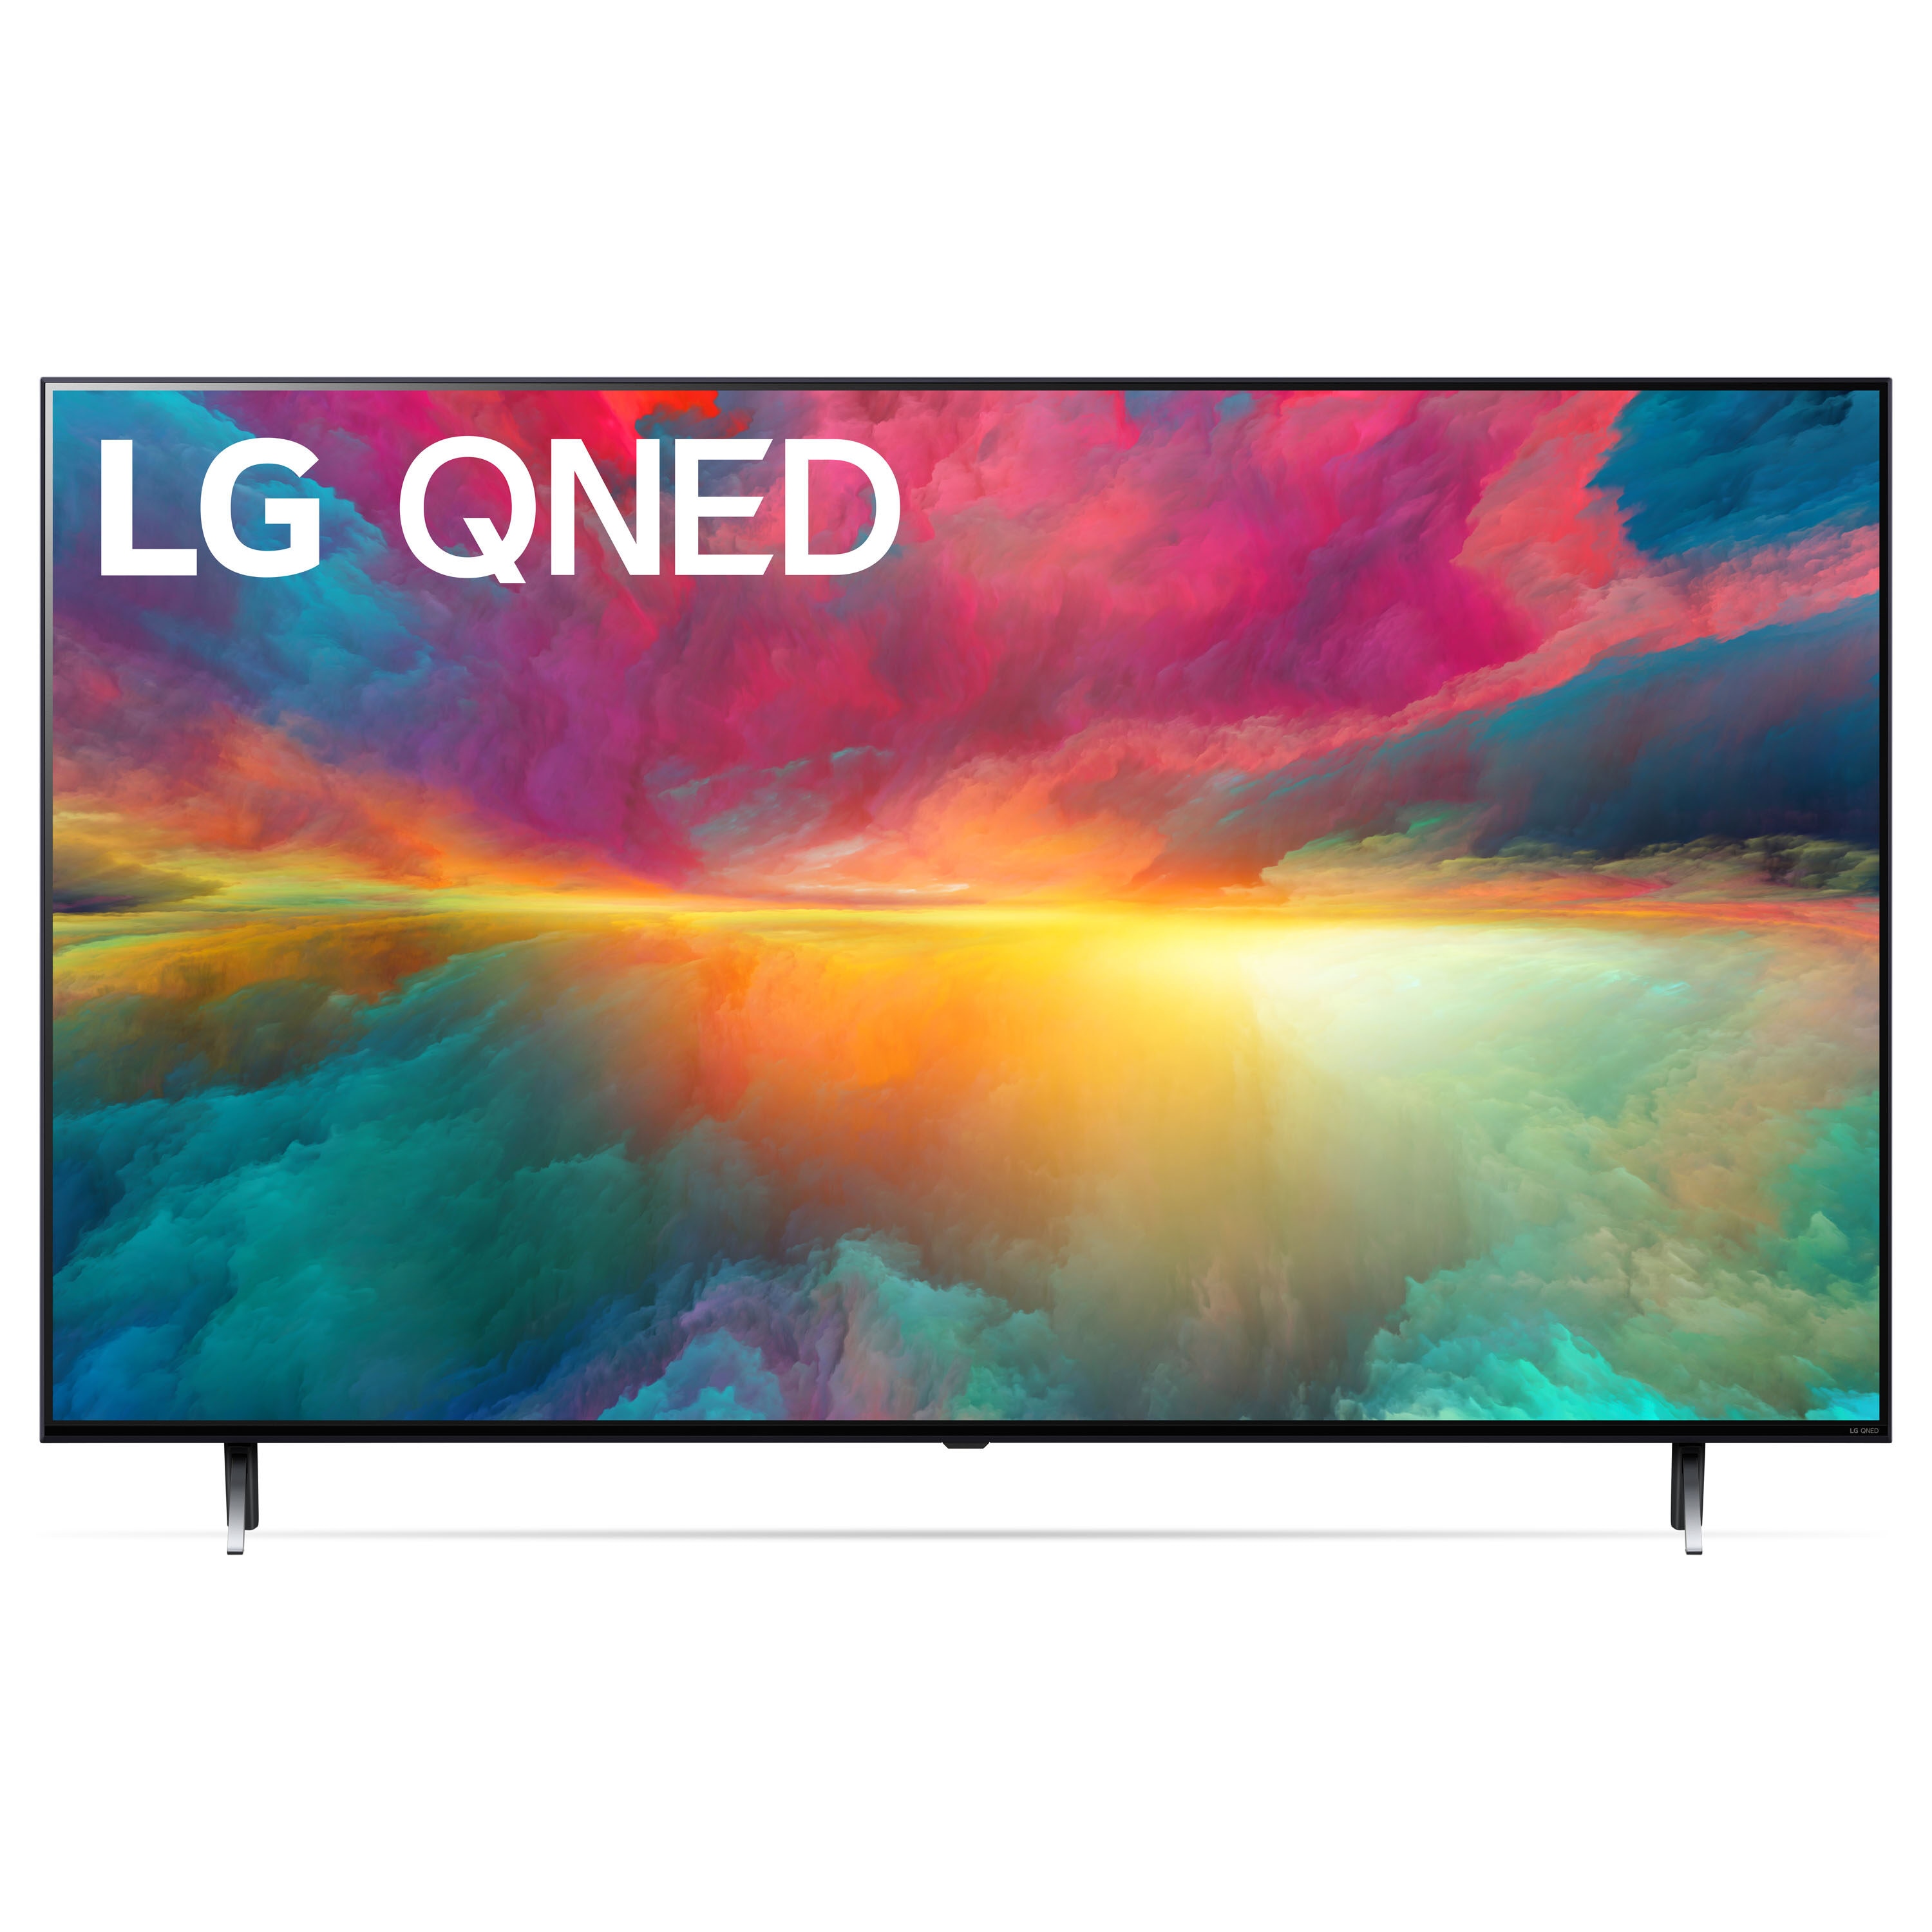  LG QNED80 Series 86-Inch Class QNED Mini LED Smart TV 4K  Processor Smart Flat Screen TV for Gaming with Magic Remote AI-Powered  86QNED80URA, 2023 with Alexa Built-in, (Black) : Electronics